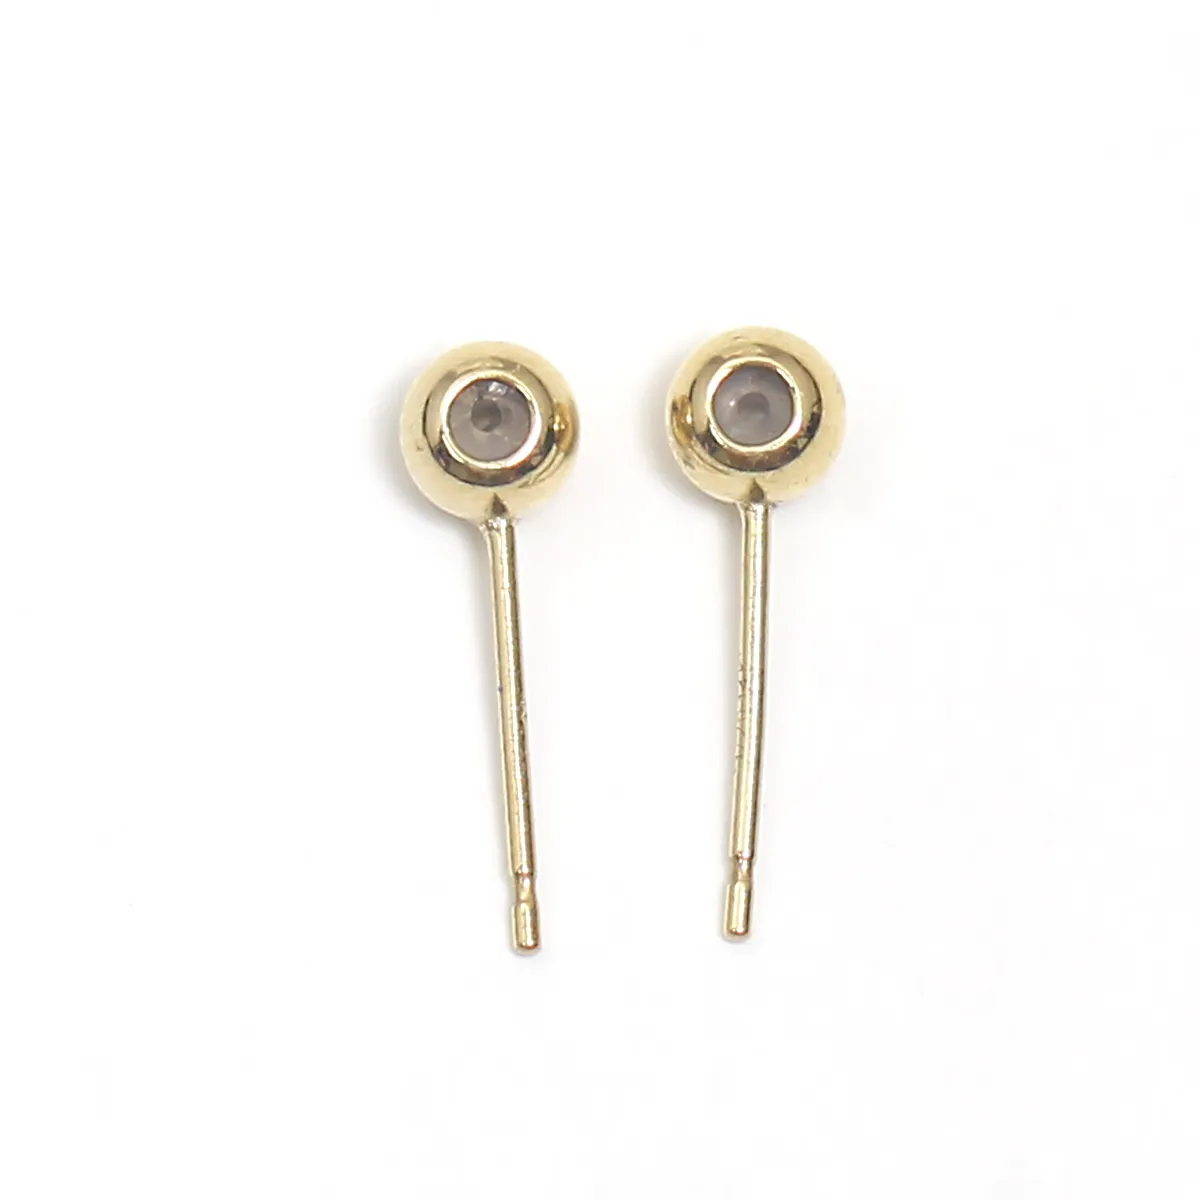 Beadsnice Gold Filled Classic stud Earring Post women jewelry components